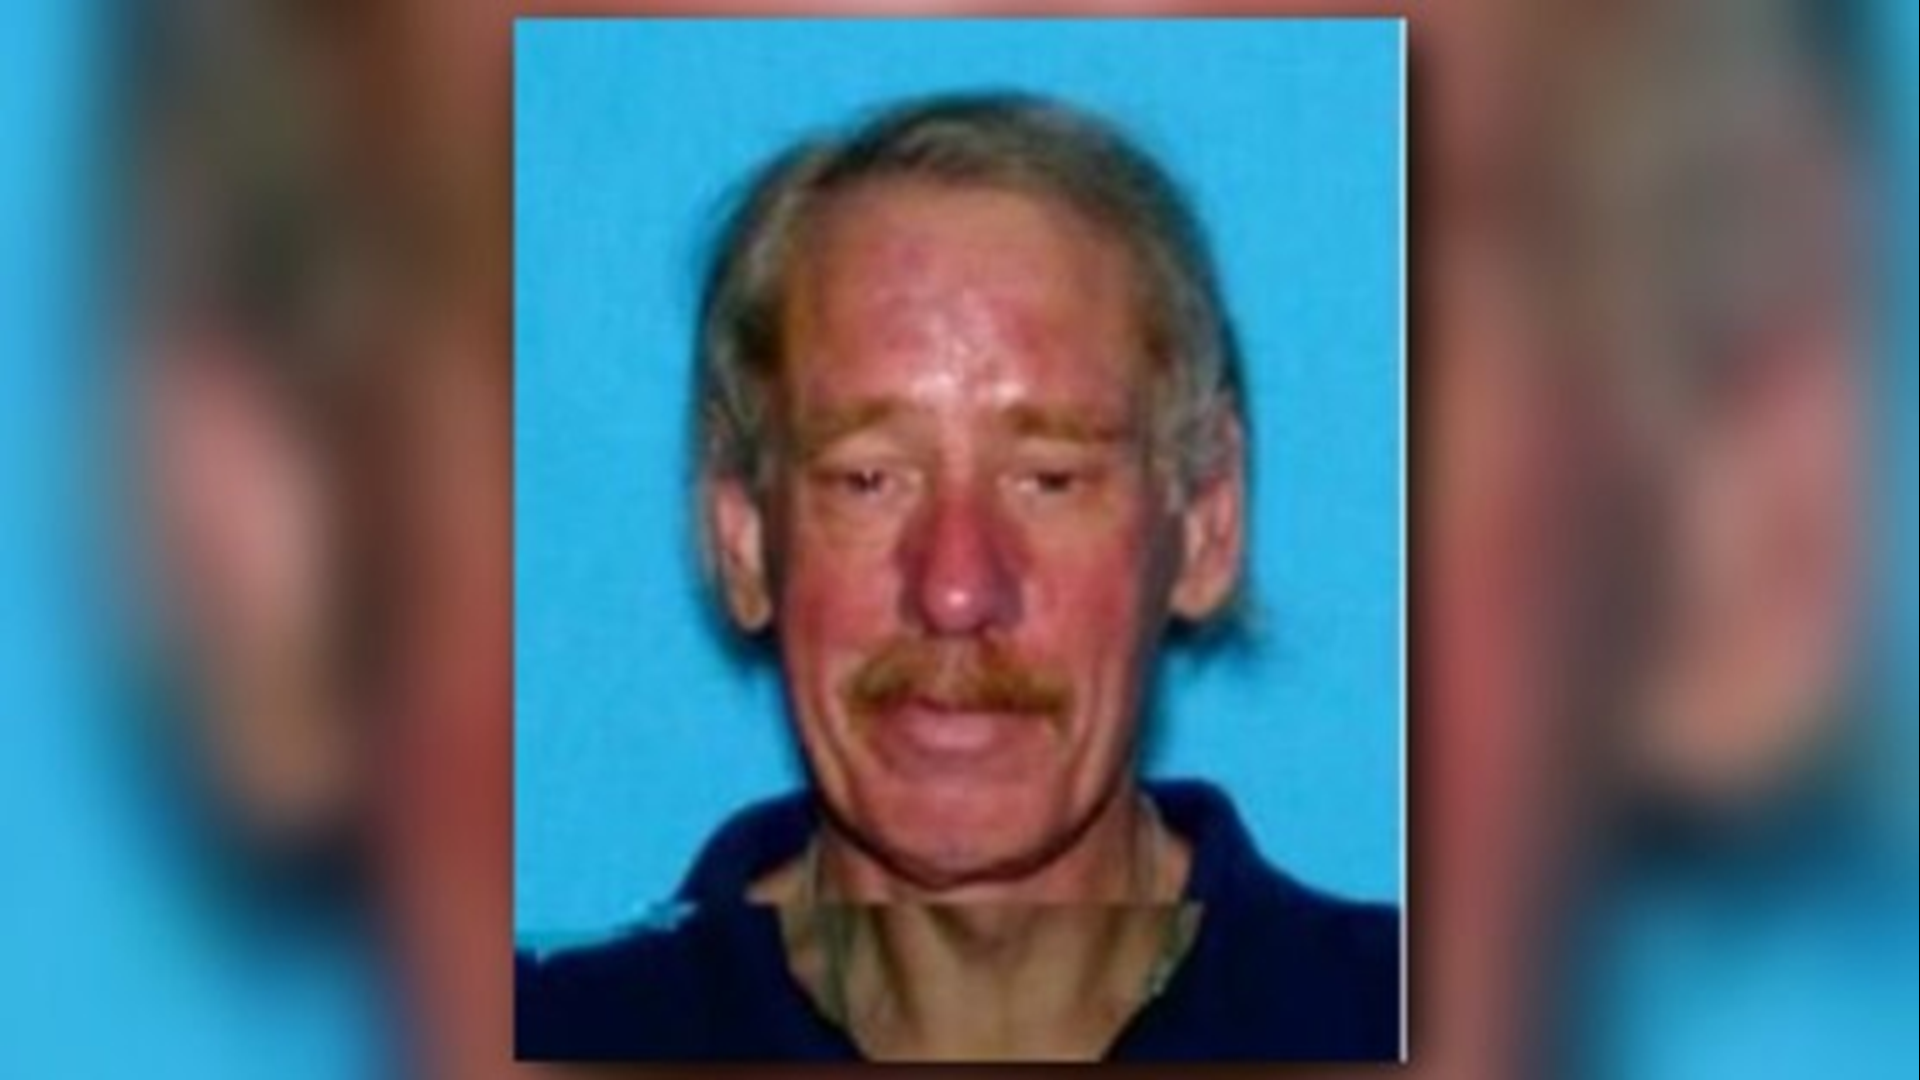 70 year-old Howard Wolf Payne was last seen in the area of Lafayette Avenue and Delaware Street in Grand Rapids on April 22 at 11:30 p.m., when he left his residence on foot, possibly headed toward the downtown area.